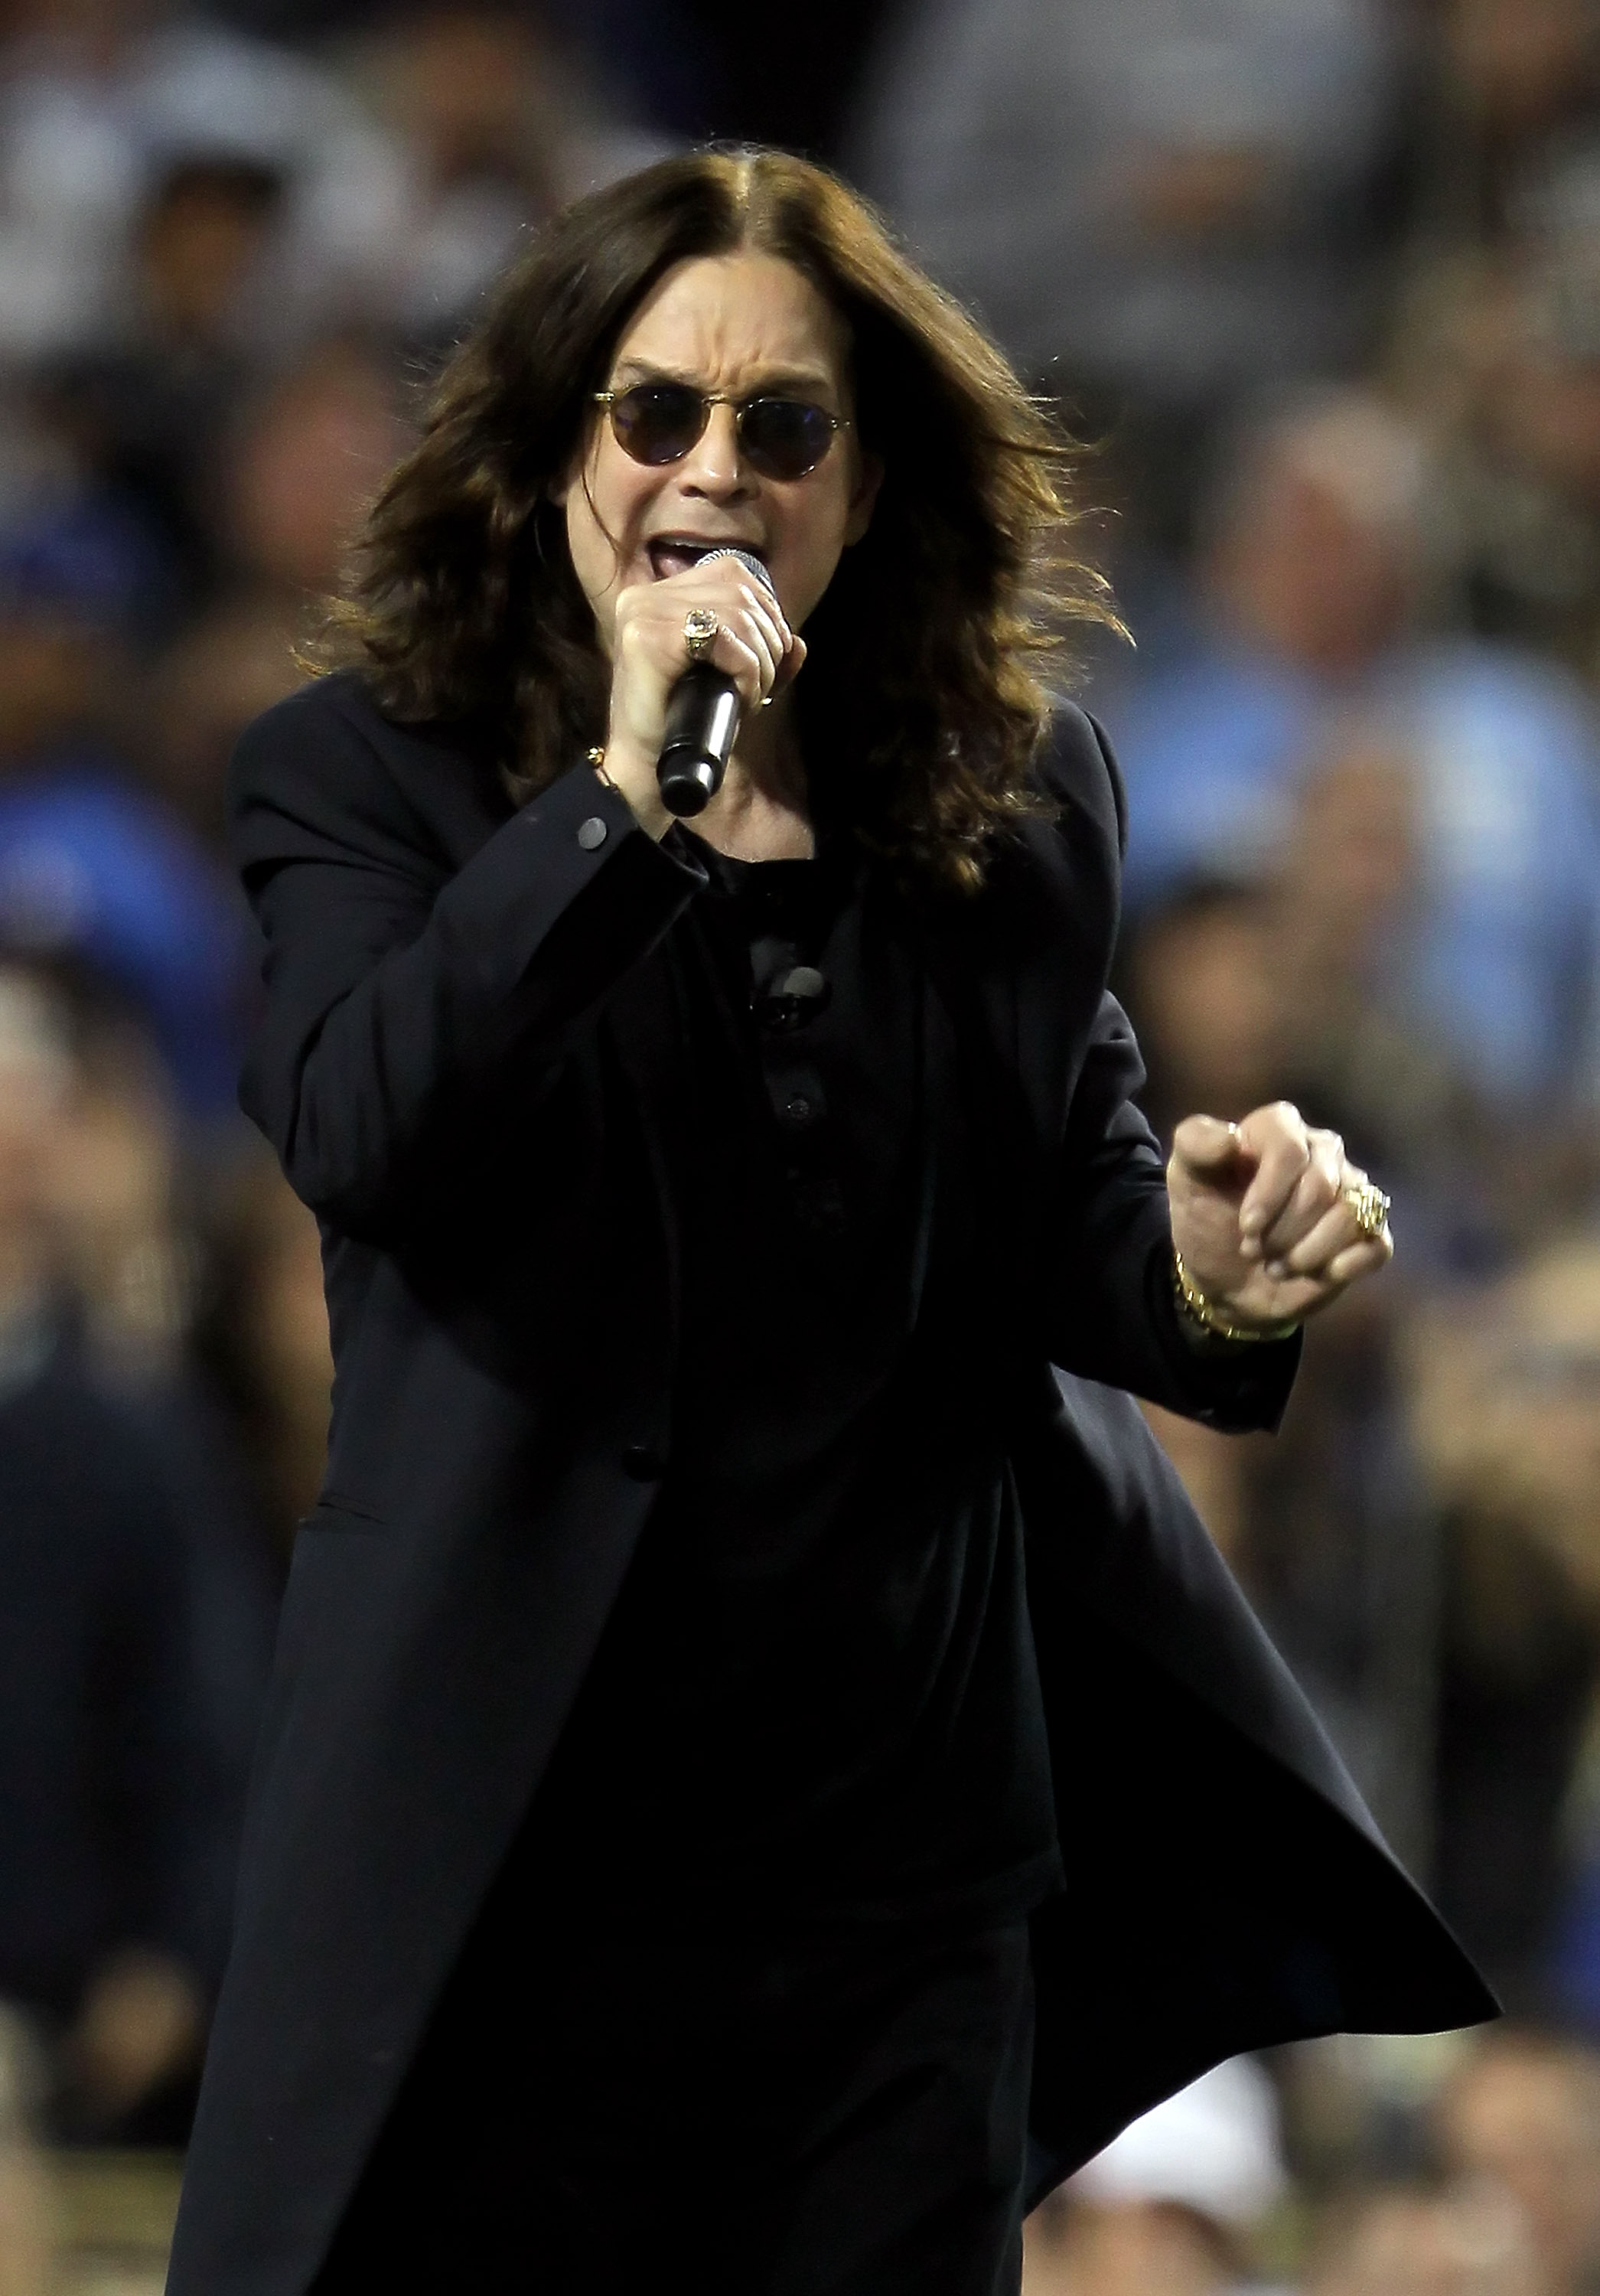 LOS ANGELES, CA - JUNE 11:  Singer-songwriter Ozzy Osbourne tries to lead the fans into the Guiness Book of World Records for the all-time loudest and longest scream during an interleague game between the Los Angeles Angels of Anaheim and the Los Angeles